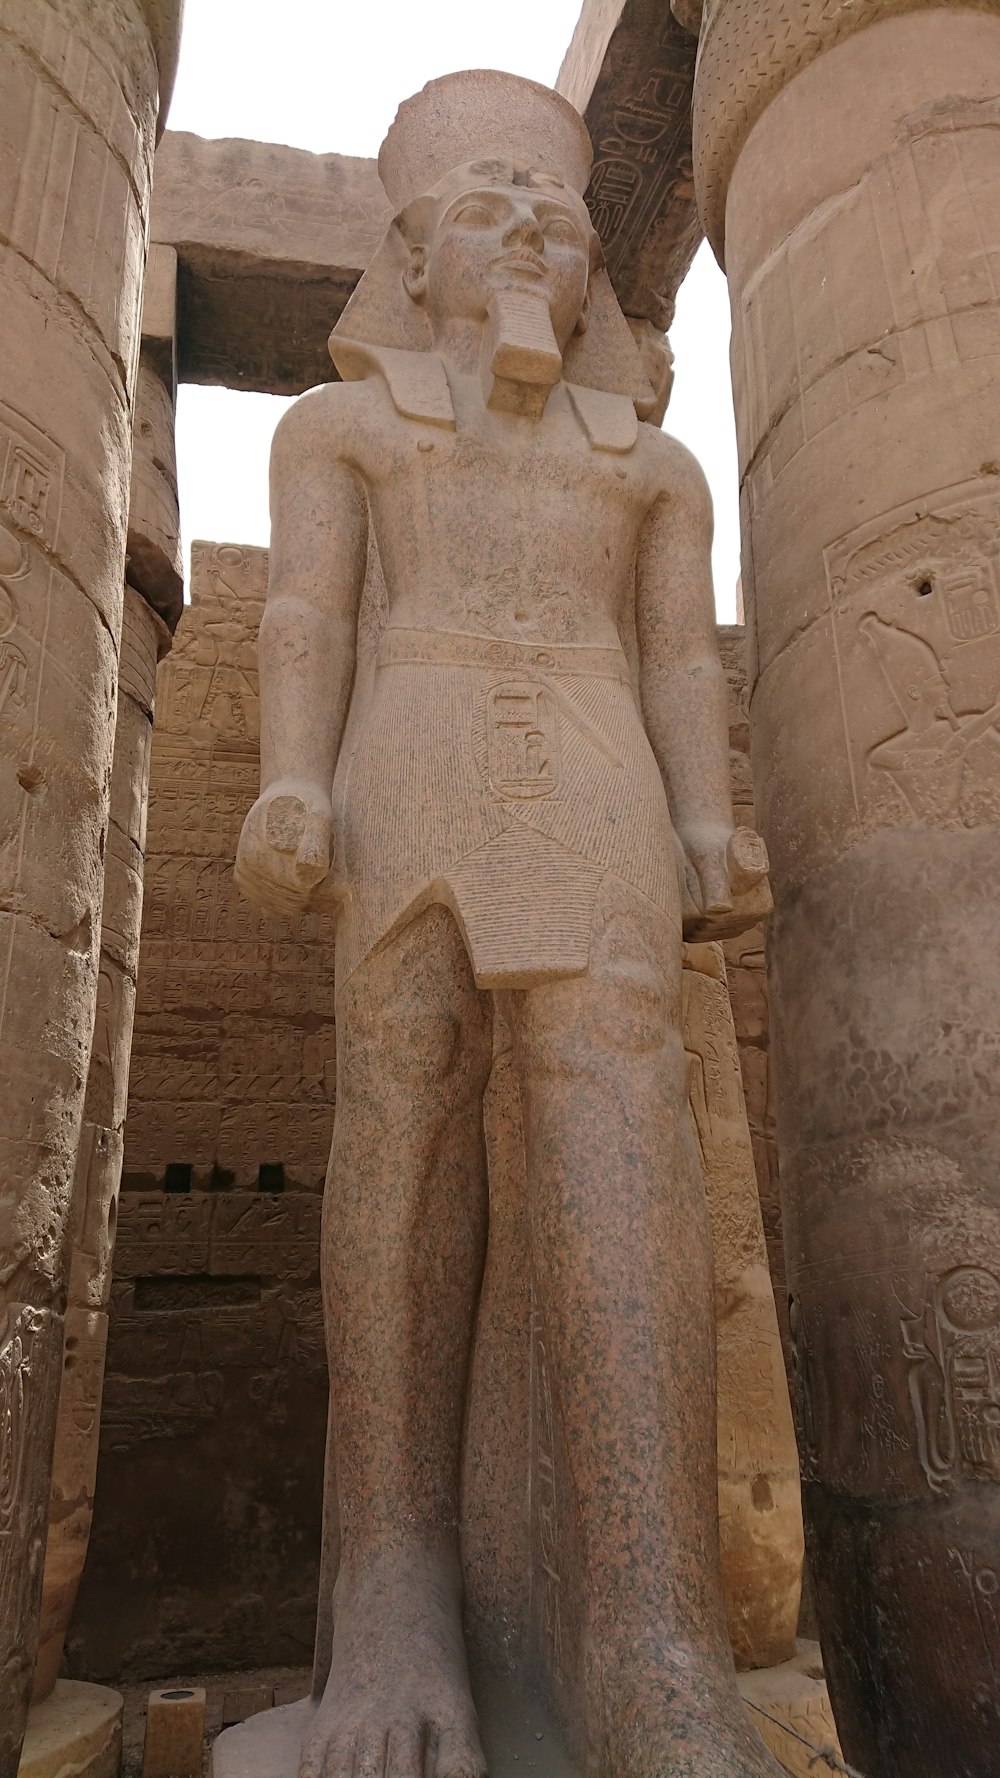 a statue of a man standing next to two large pillars